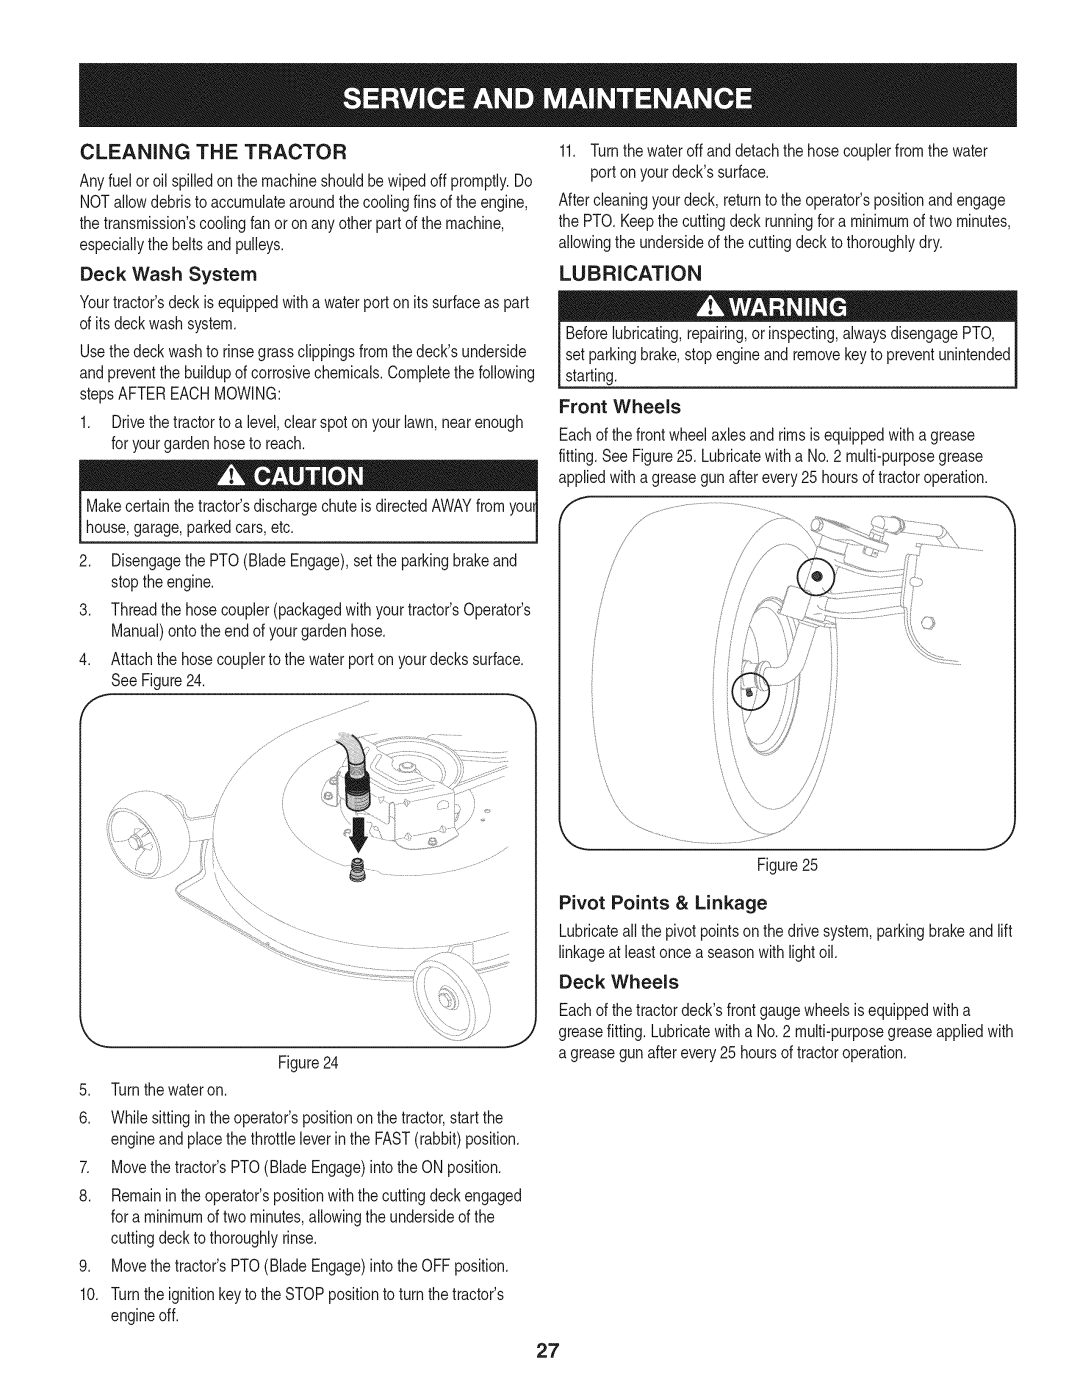 Craftsman 247.28672, PYT 9000 manual Cleaning The Tractor, Lubrication, Front Wheels, Pivot Points & Linkage 